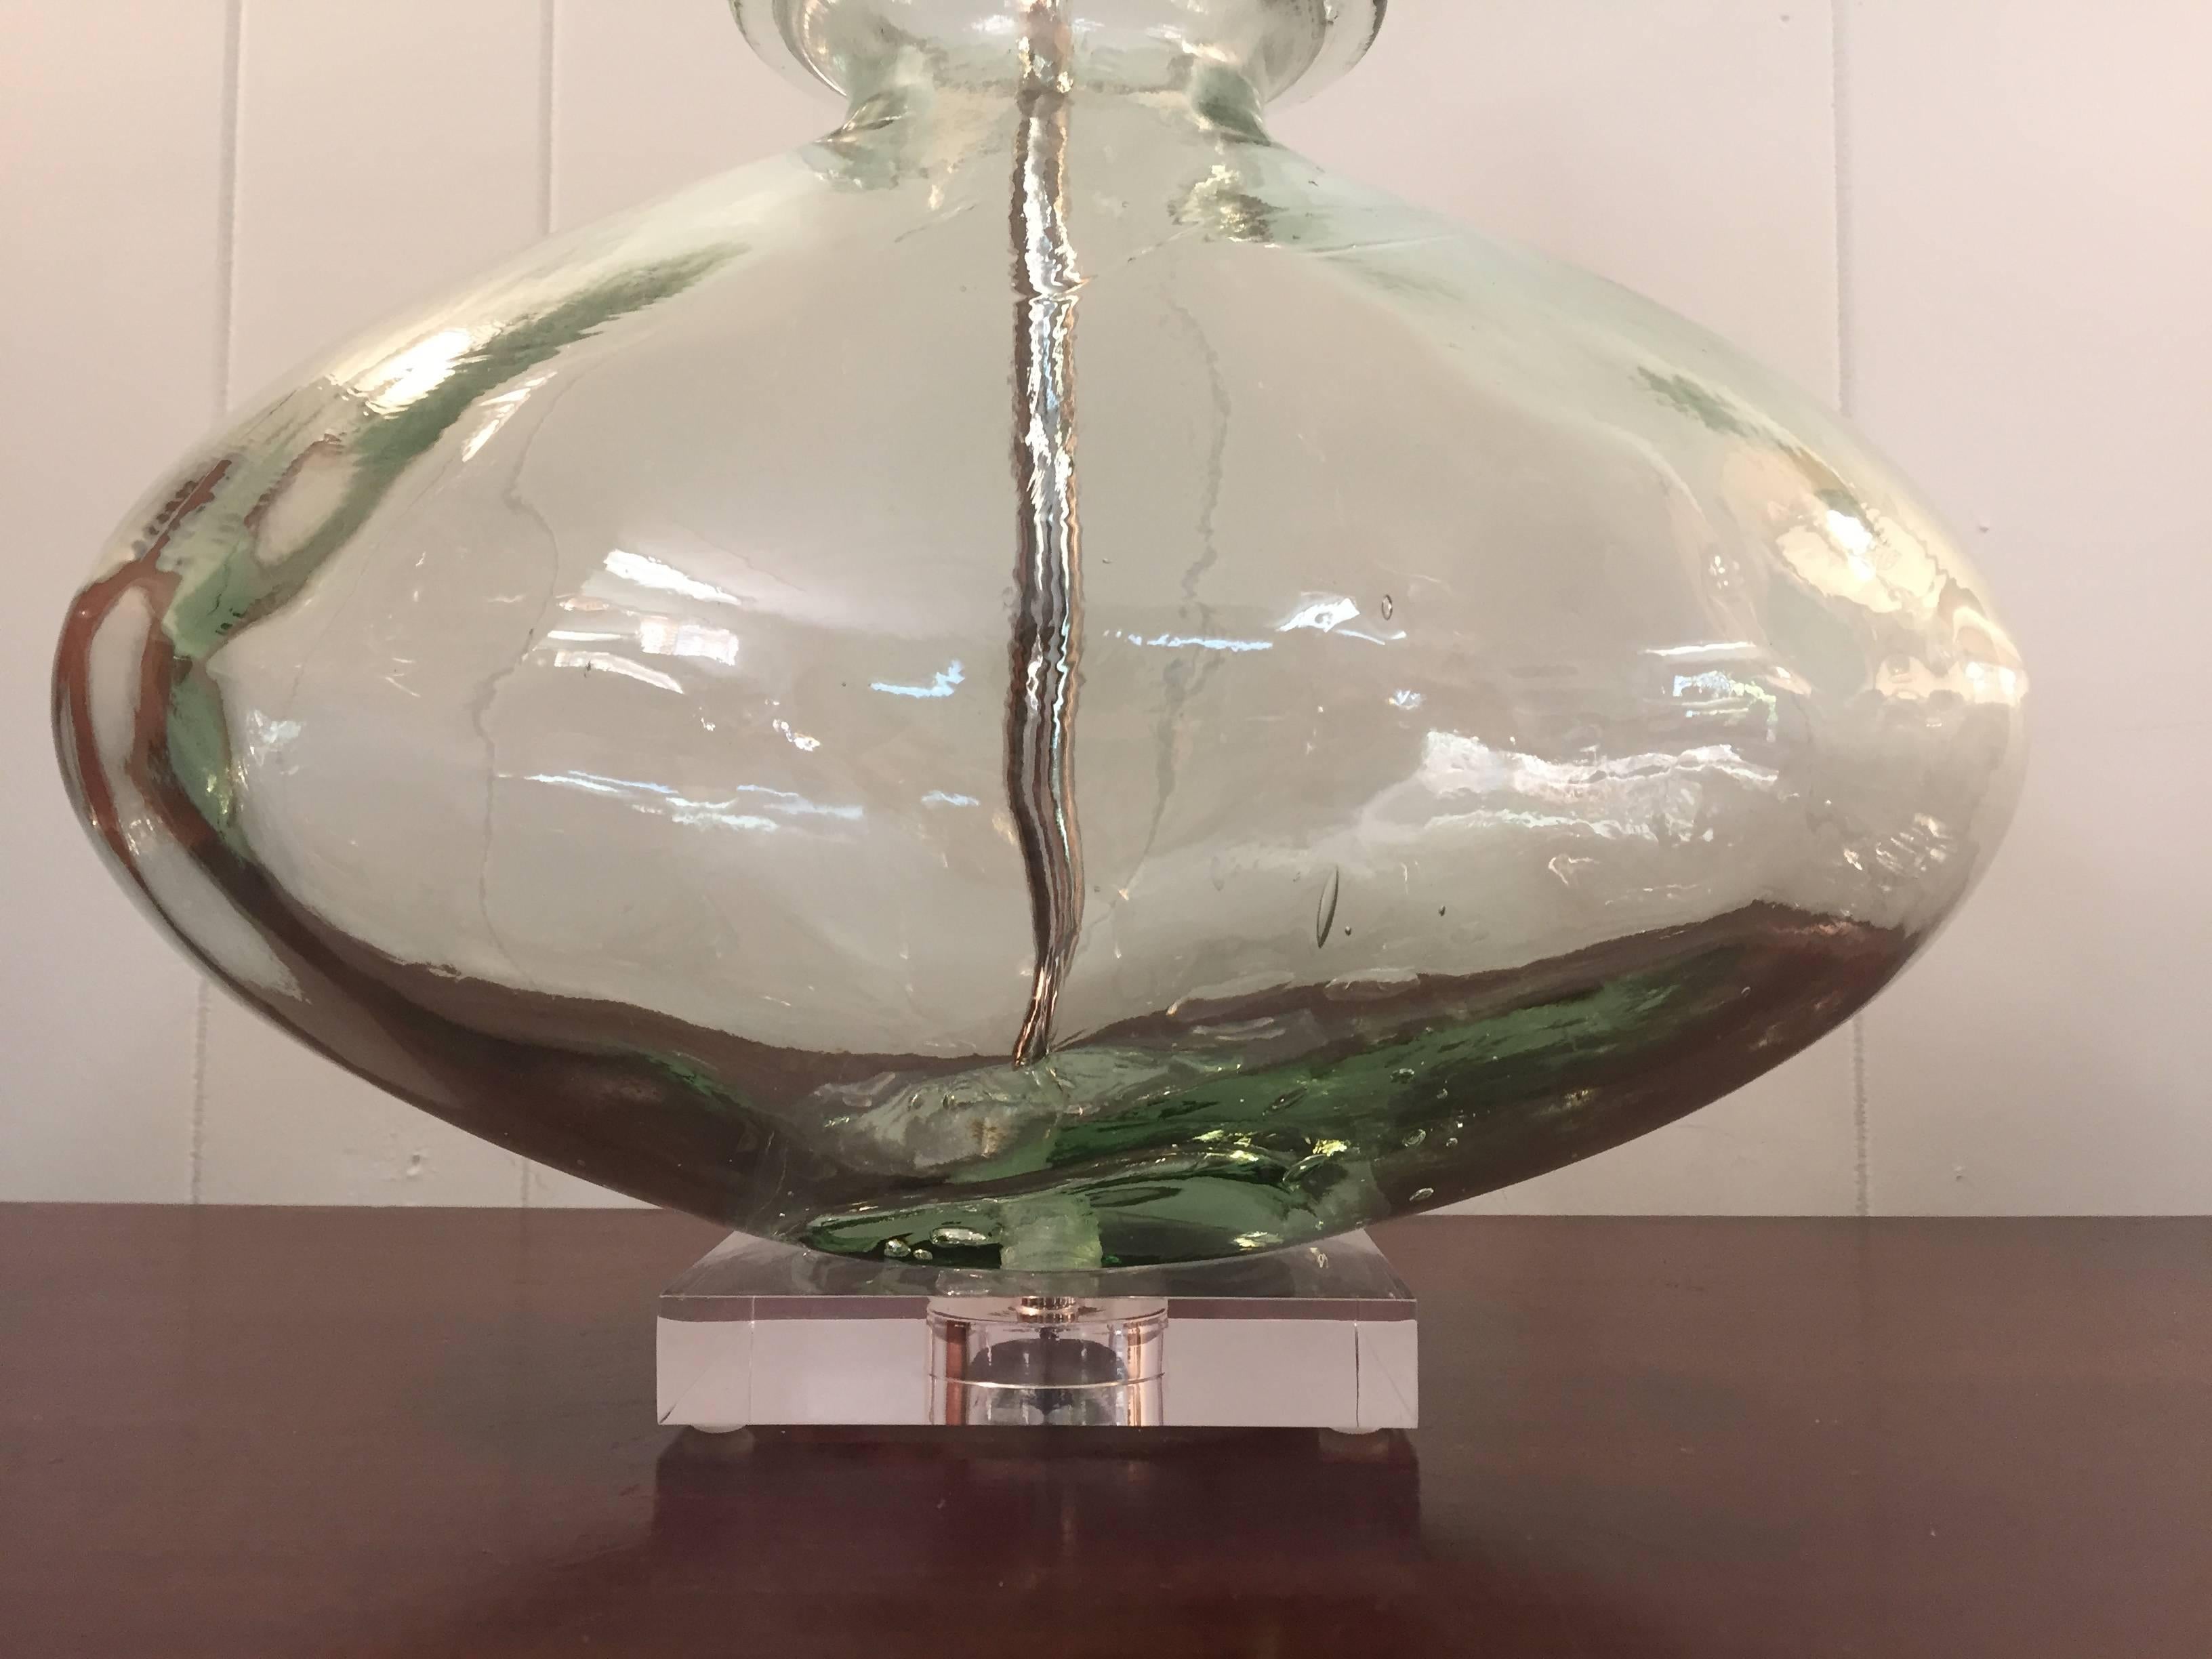 Offered is a gorgeous, 1970s pale-green blown glass lamp. The piece has all new custom Lucite cap and base, new wiring, and three-way socket. The pale-green resembles a blue or green sea-glass coloring.